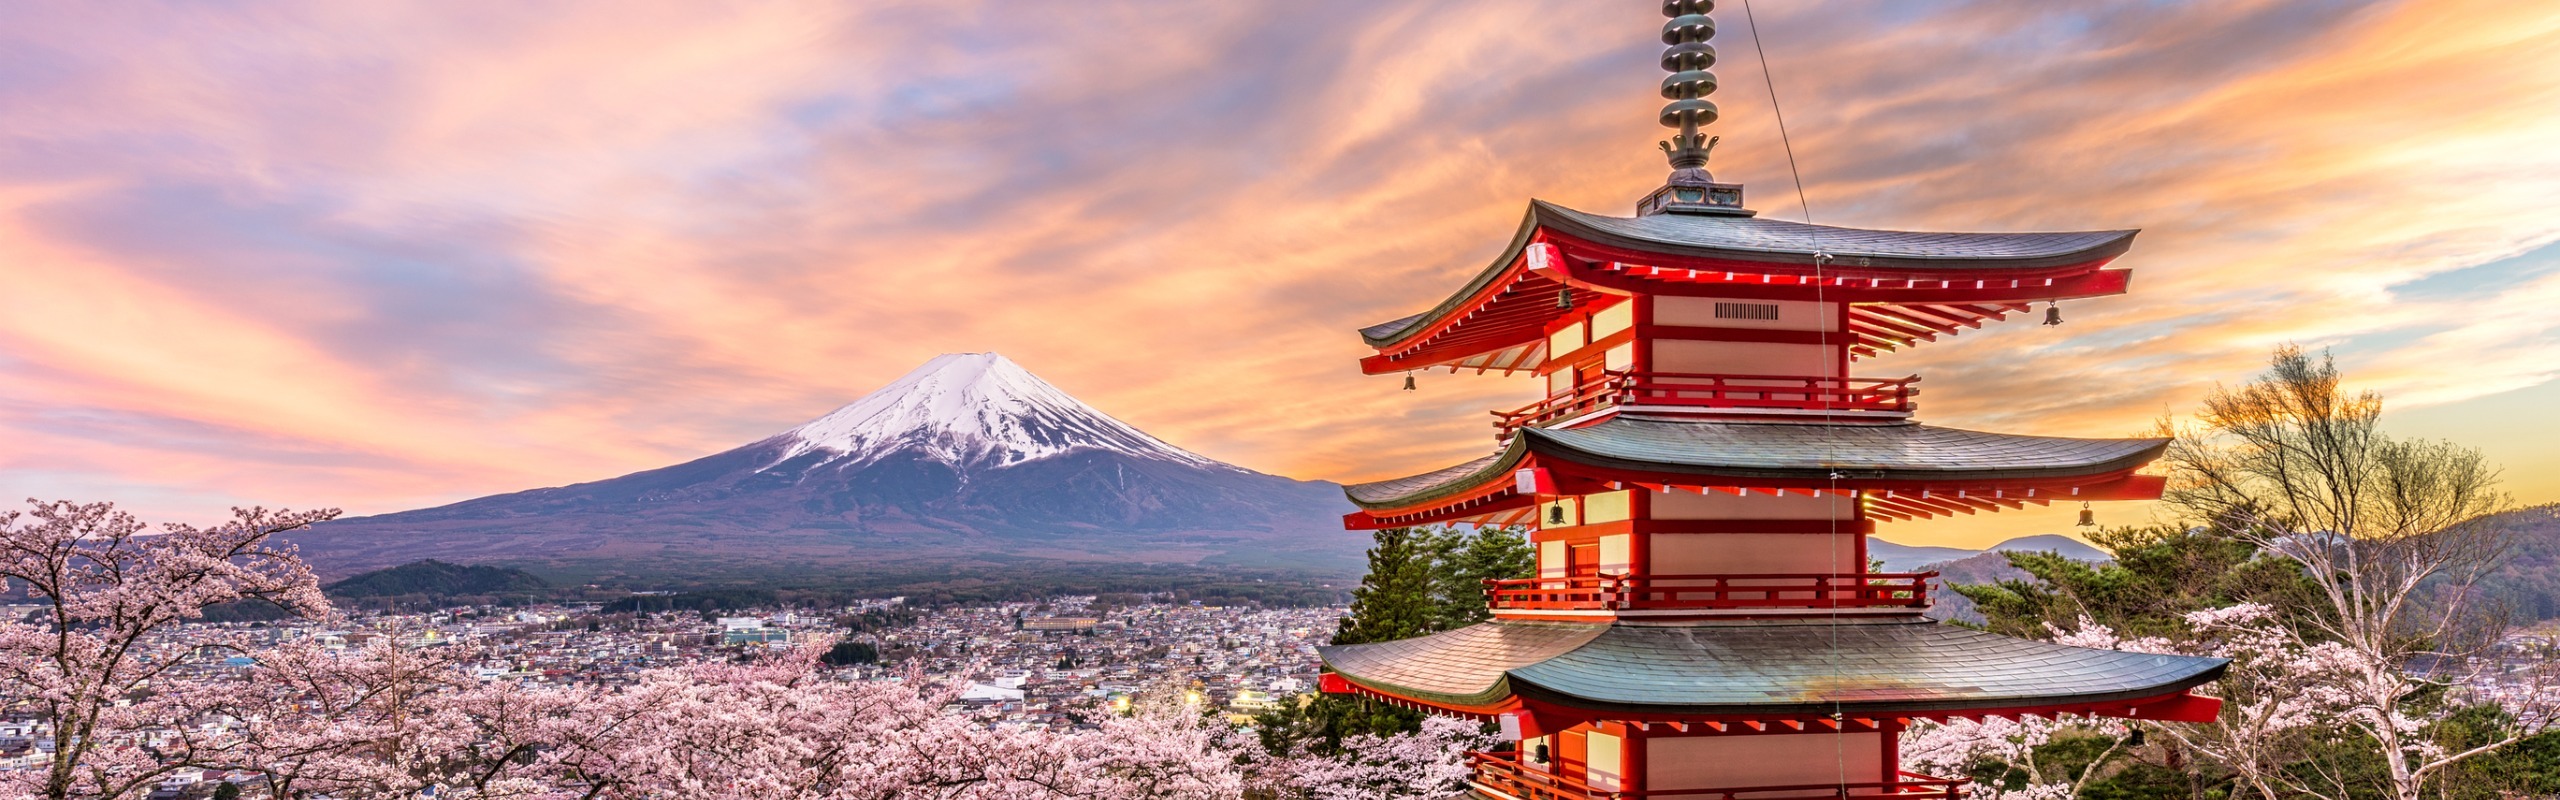 How Long to Spend in Japan: From 5 Days to 4 weeks